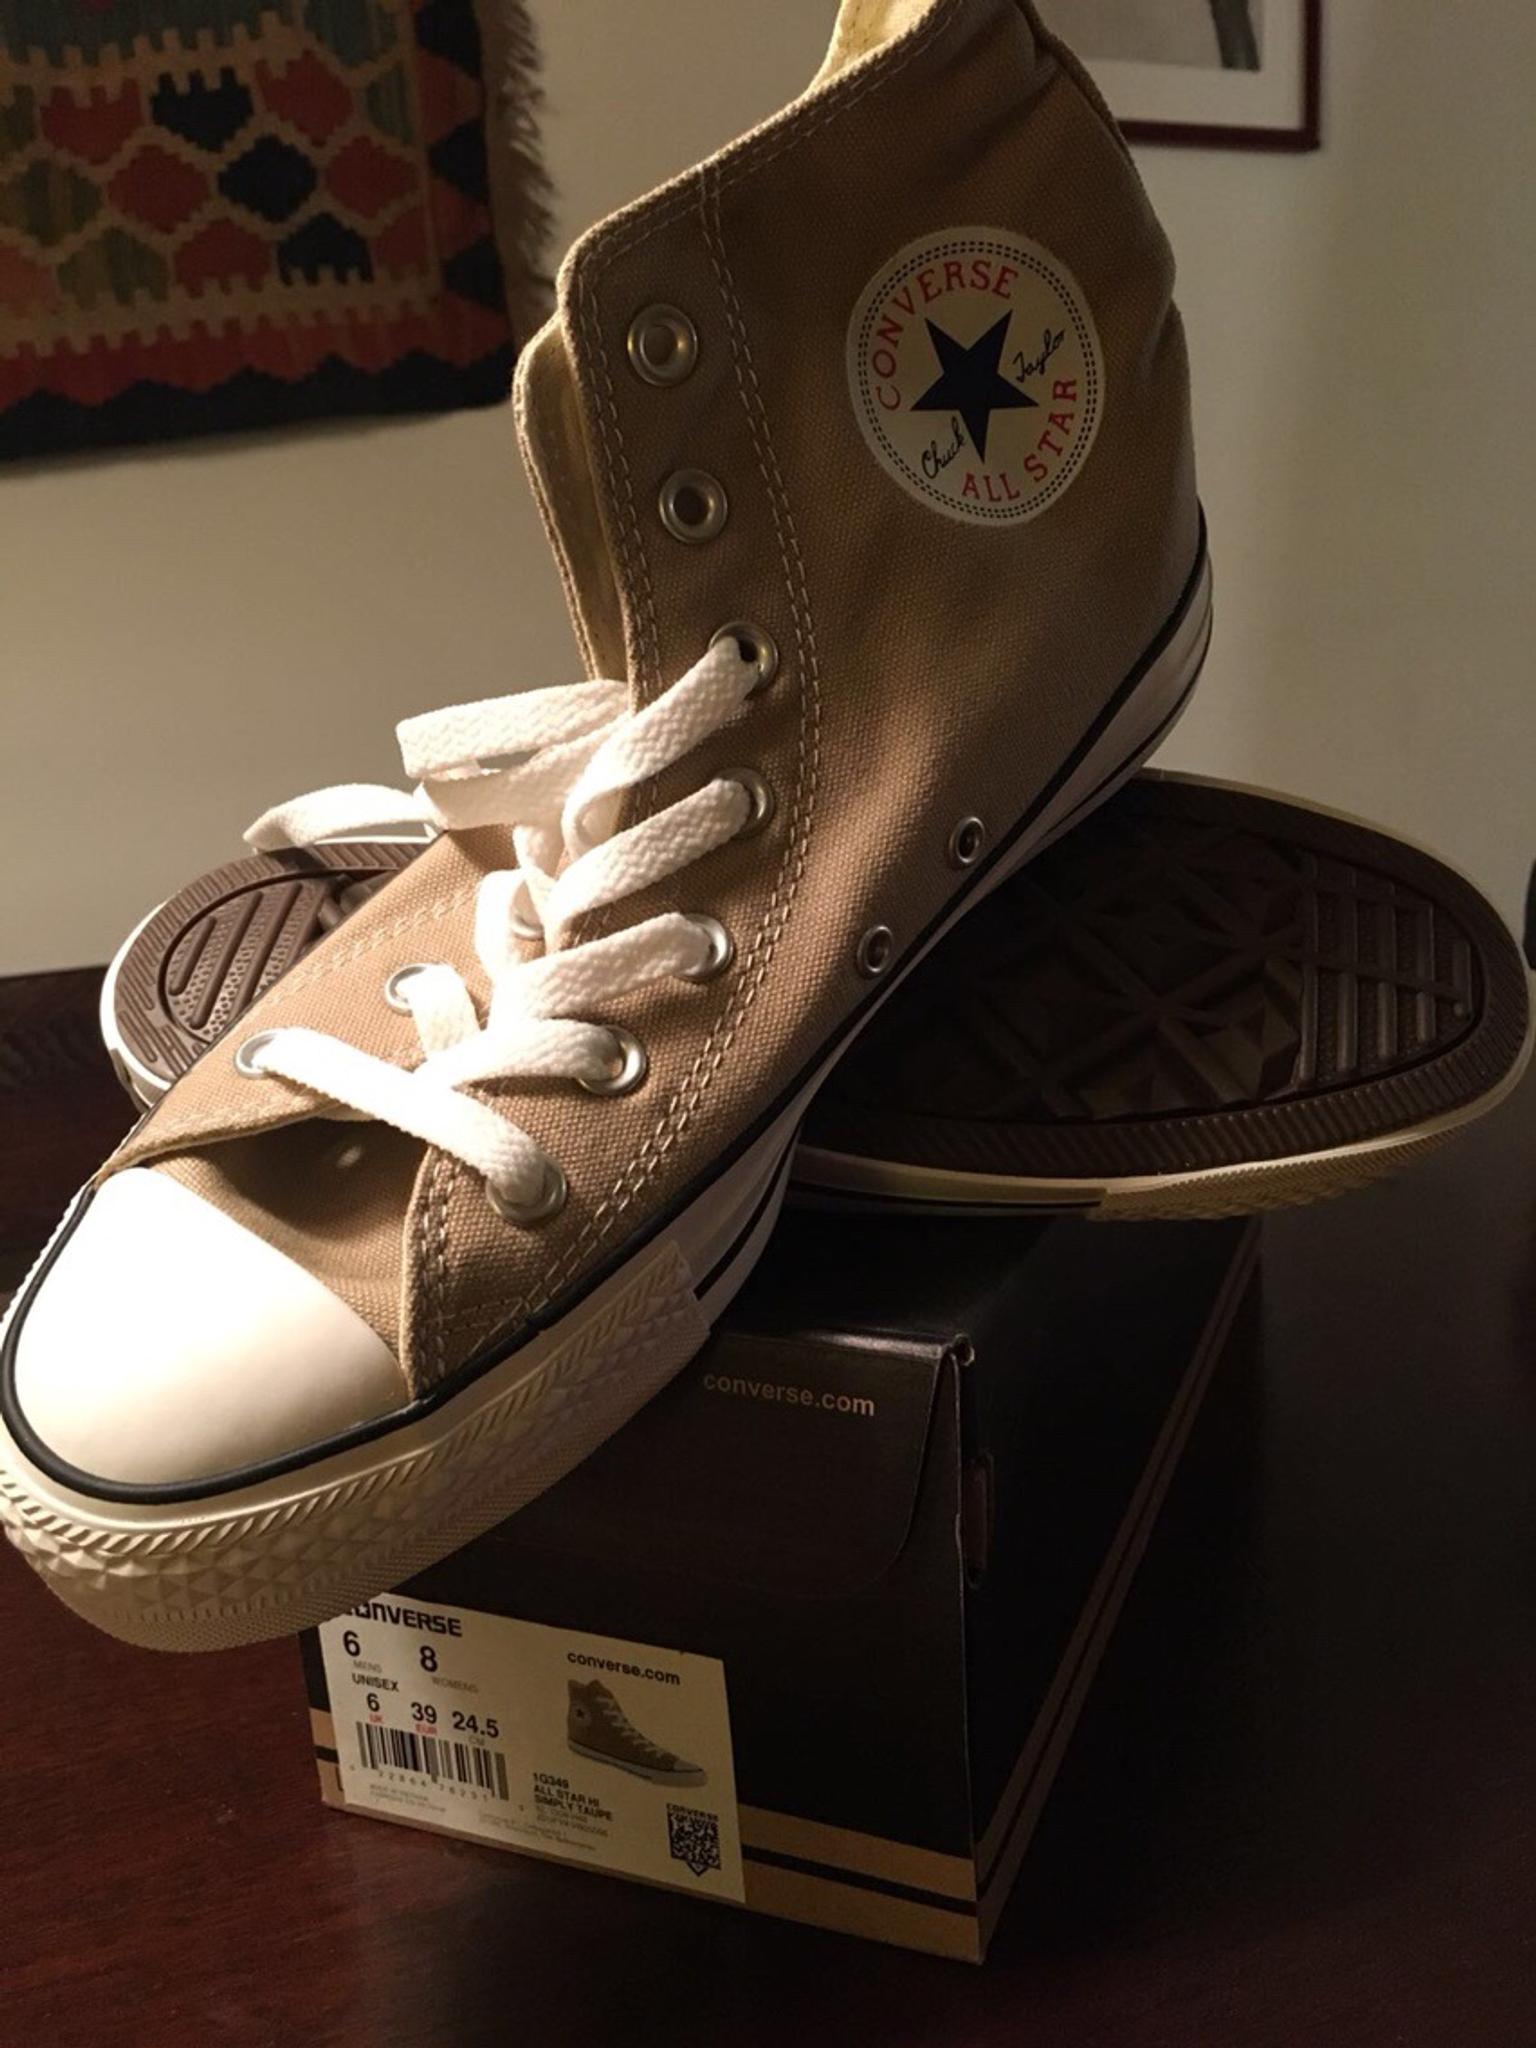 Converse all star numero 39 MAI USATE in 20133 Milano for €40.00 for sale |  Shpock